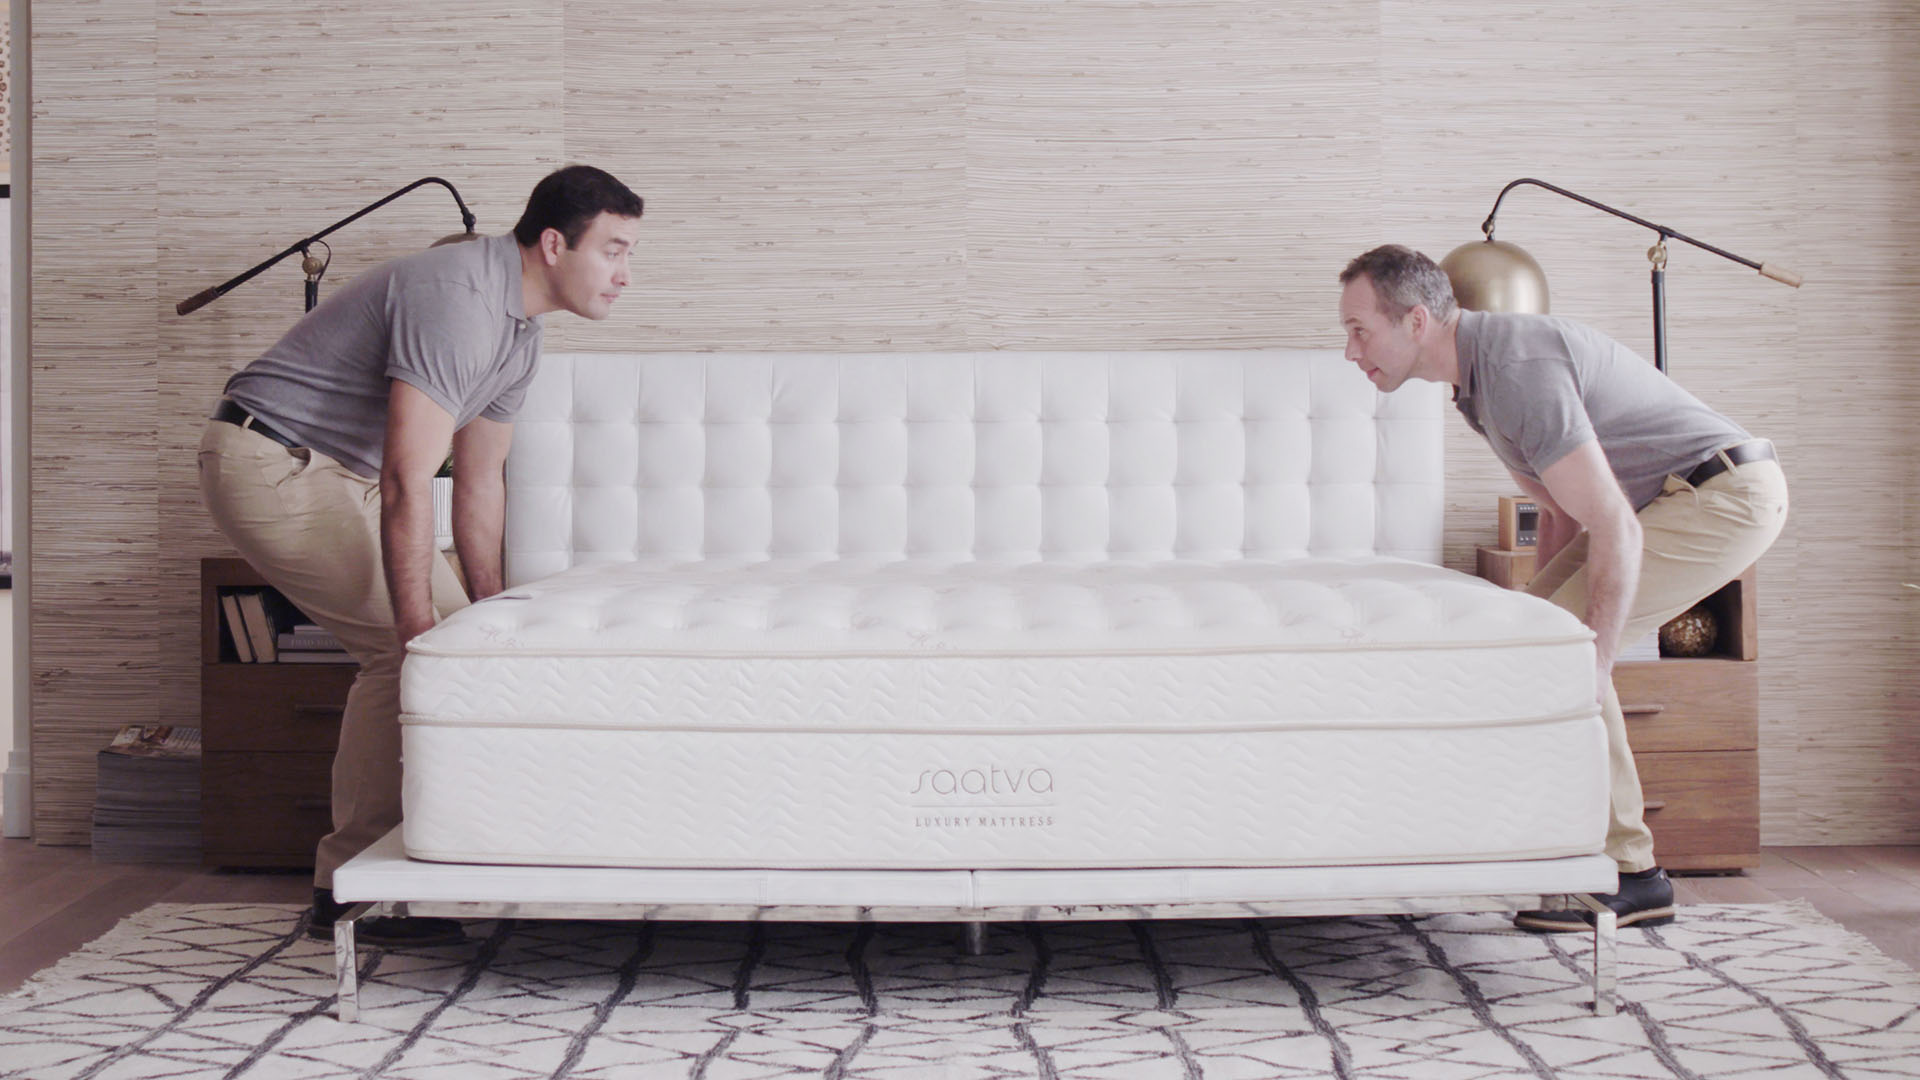 Two delivery men place a classic Saatva mattress under the bed frame